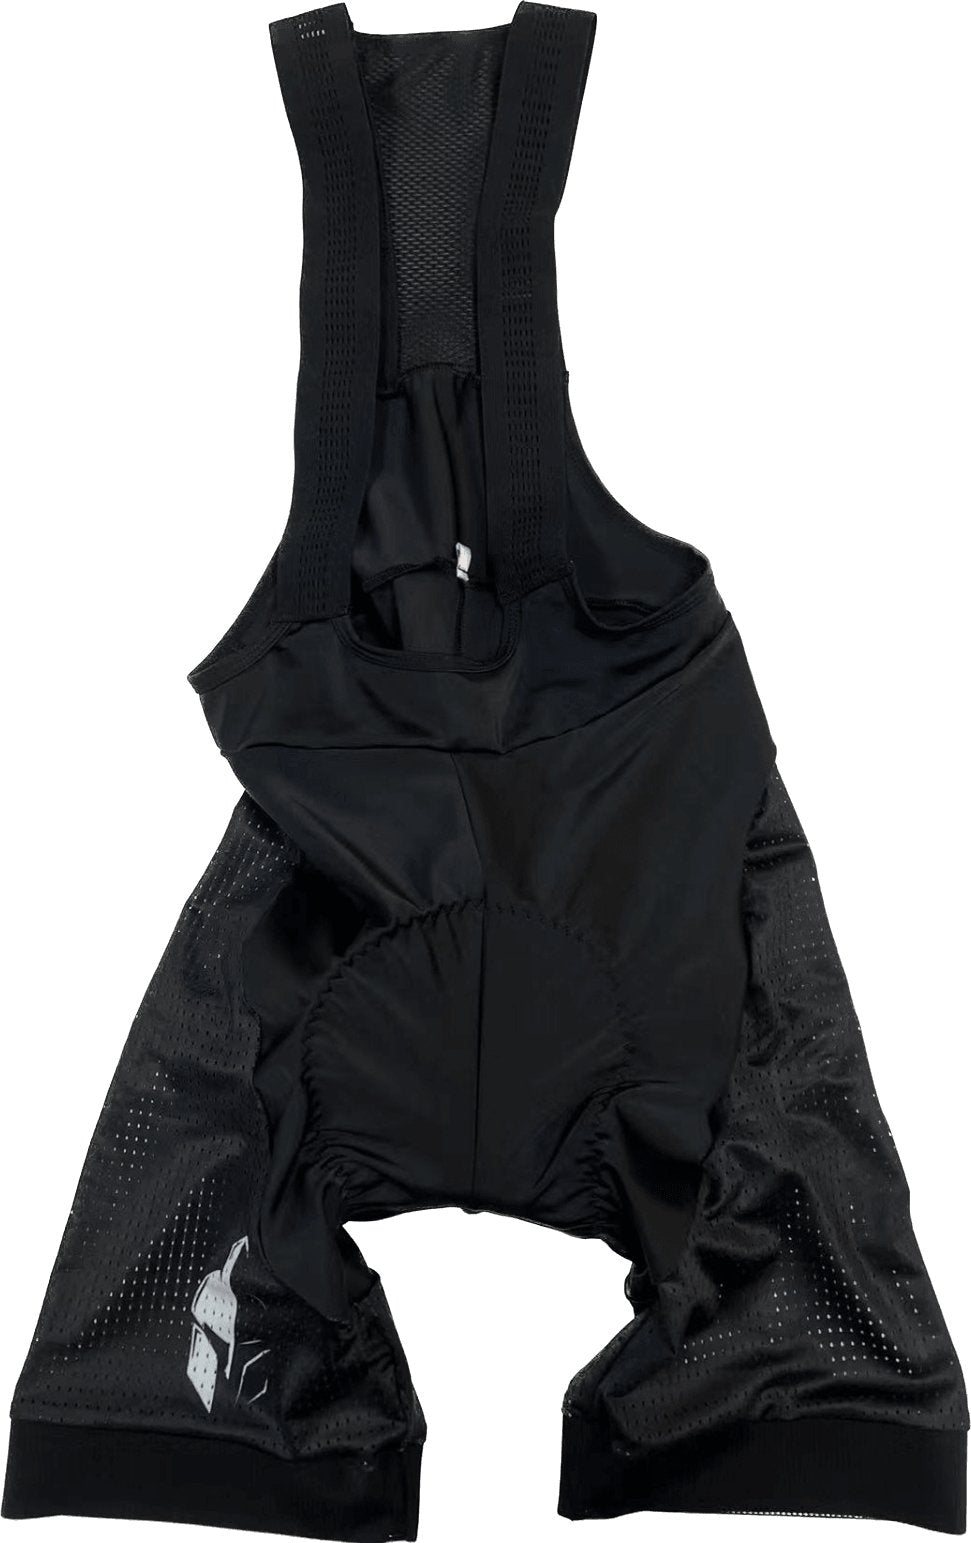 Endurance Sport by Alex Coh Pro Outdoor Shorts IRL Womens - LEVEL VELO